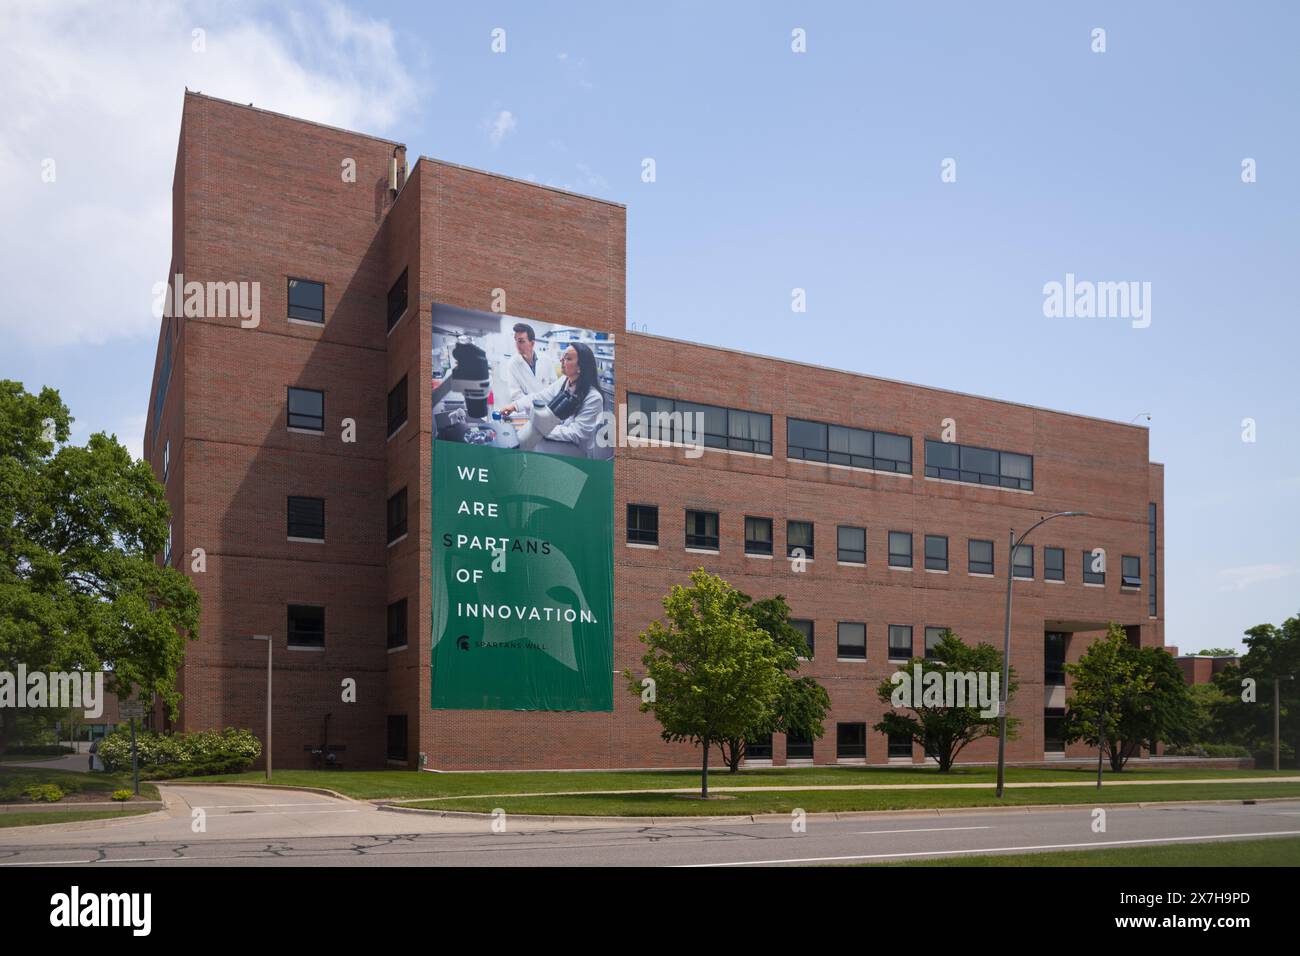 The MSU College of Law and Gast Business Library on the campus of Michigan State University, East Lansing Michigan USA Stock Photo